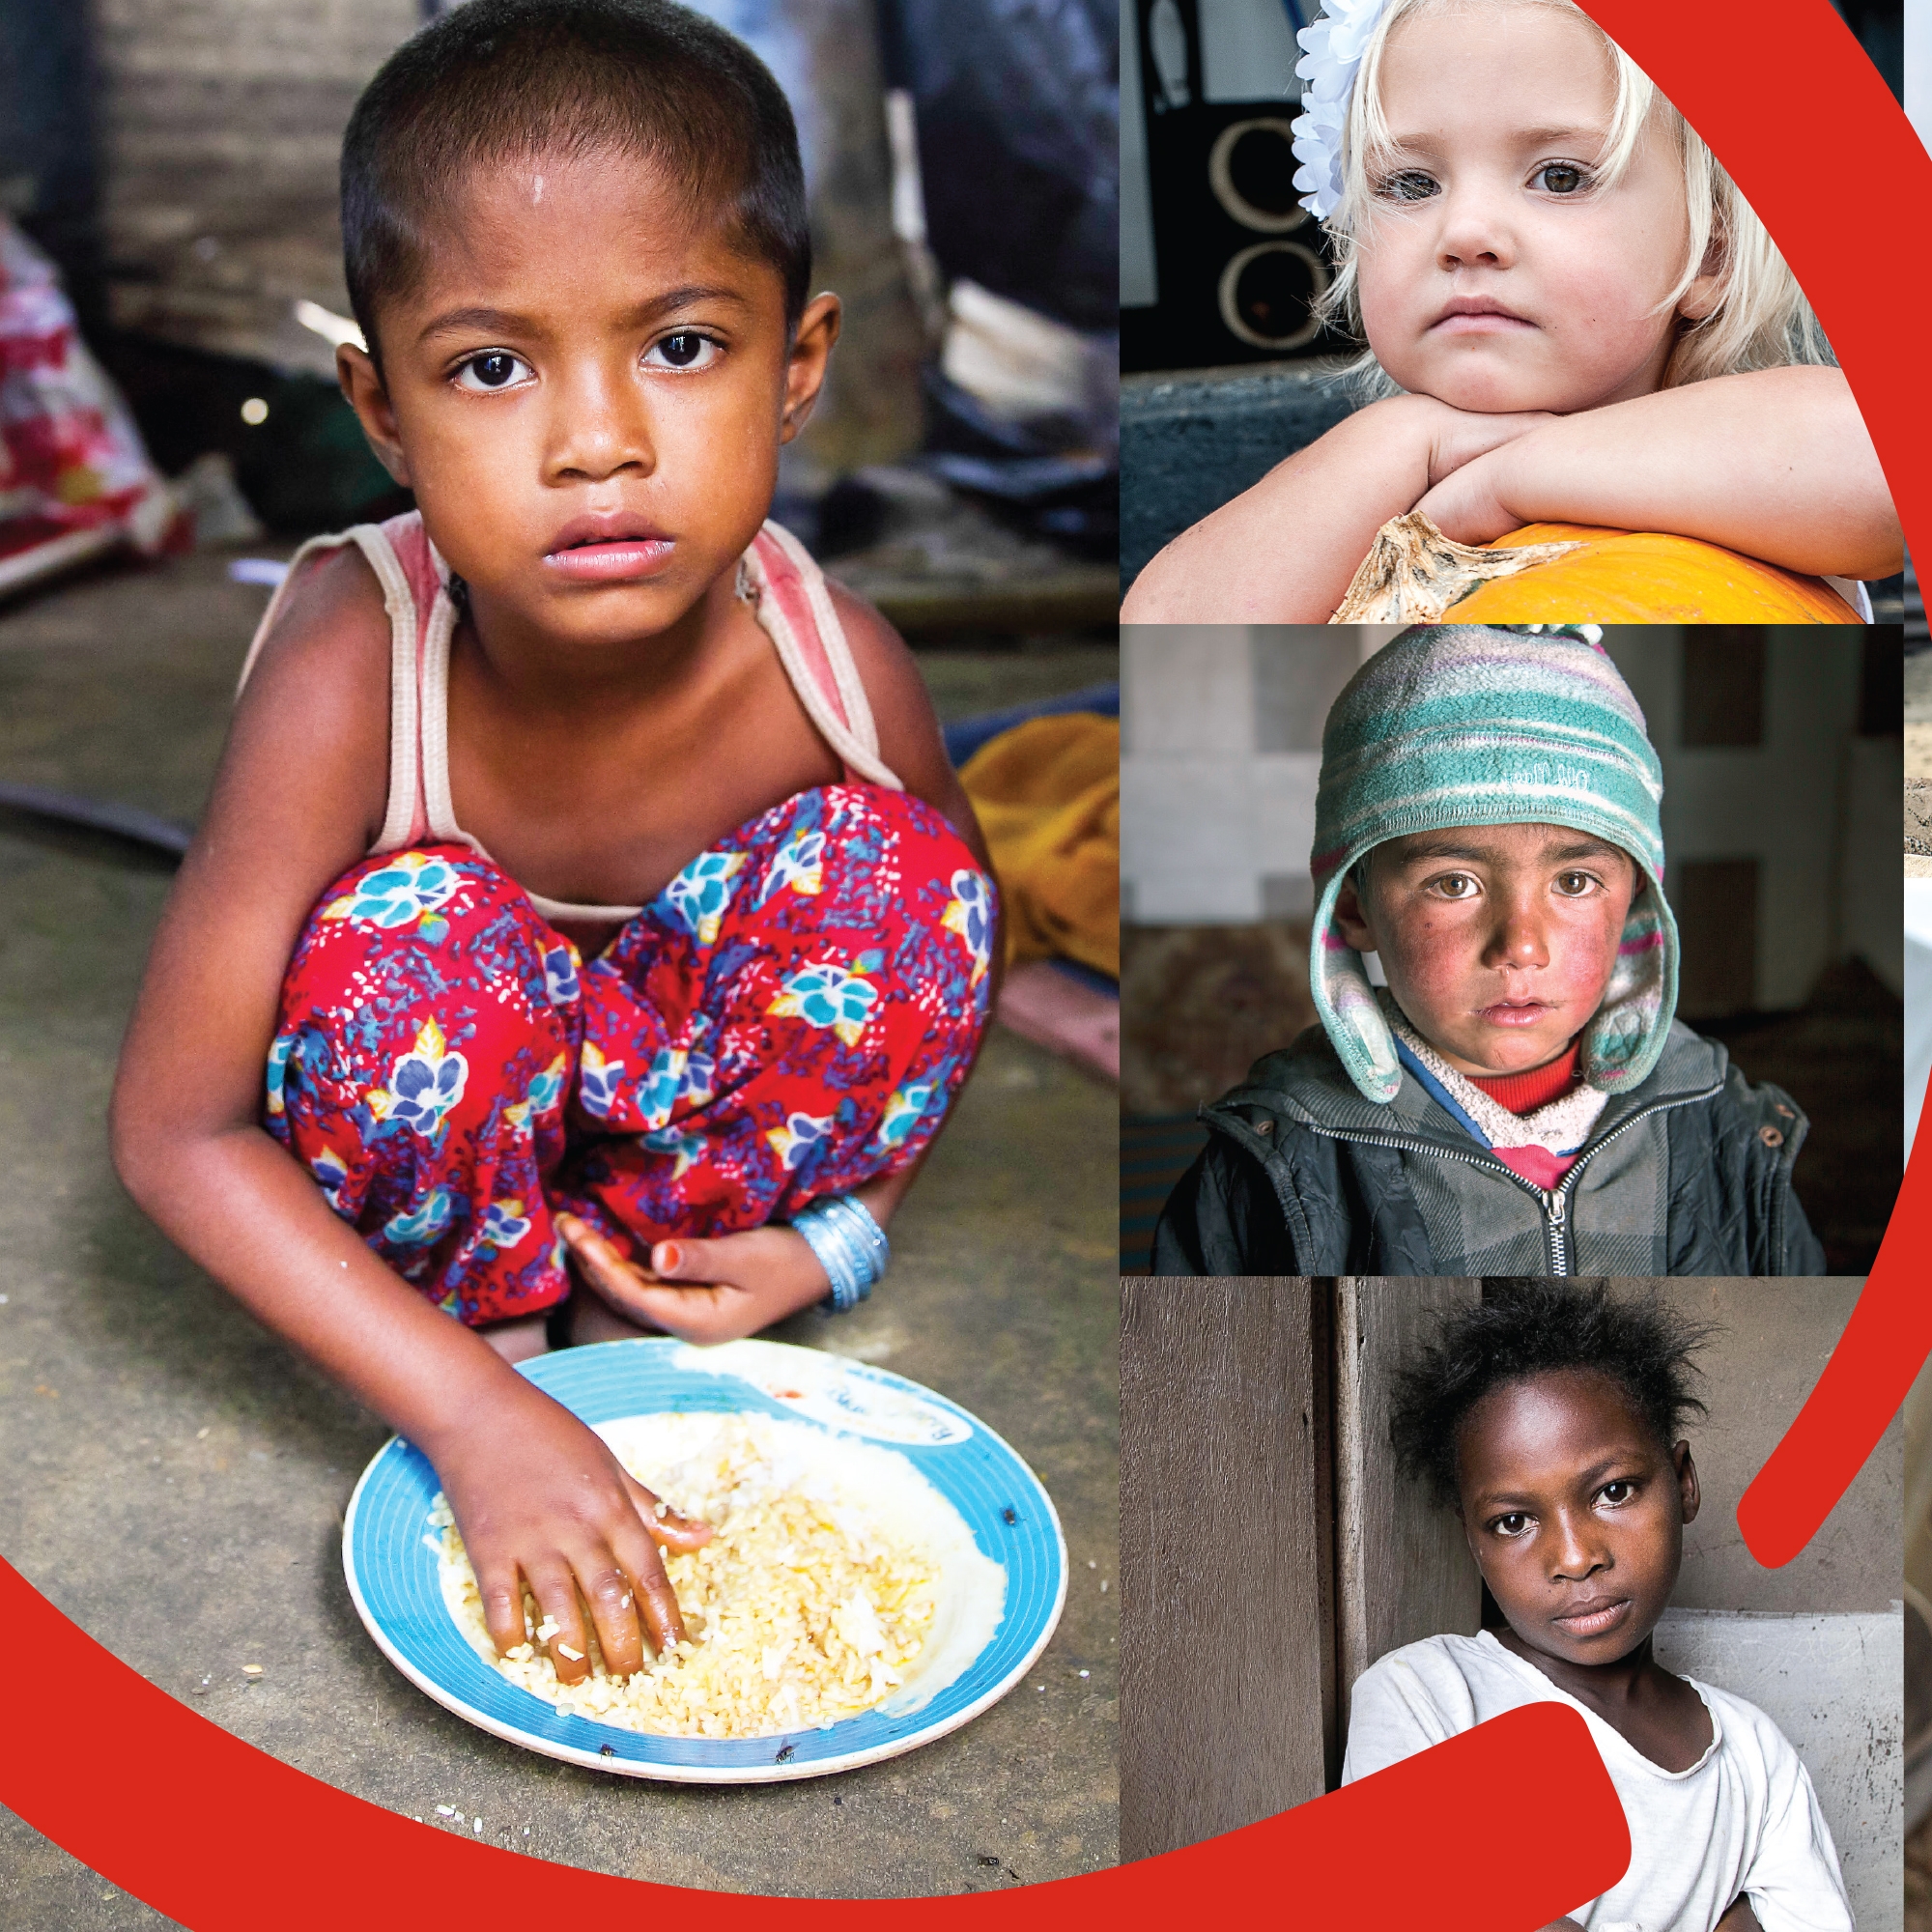 Save the Children has published our second annual End of Childhood Report, The Many Faces of Exclusion. The report details factors that force children to grow up too soon, such as pregnancy, extreme violence and living in poverty. Photo credit: Ellery Lamm / Save the Children, March 2018. 